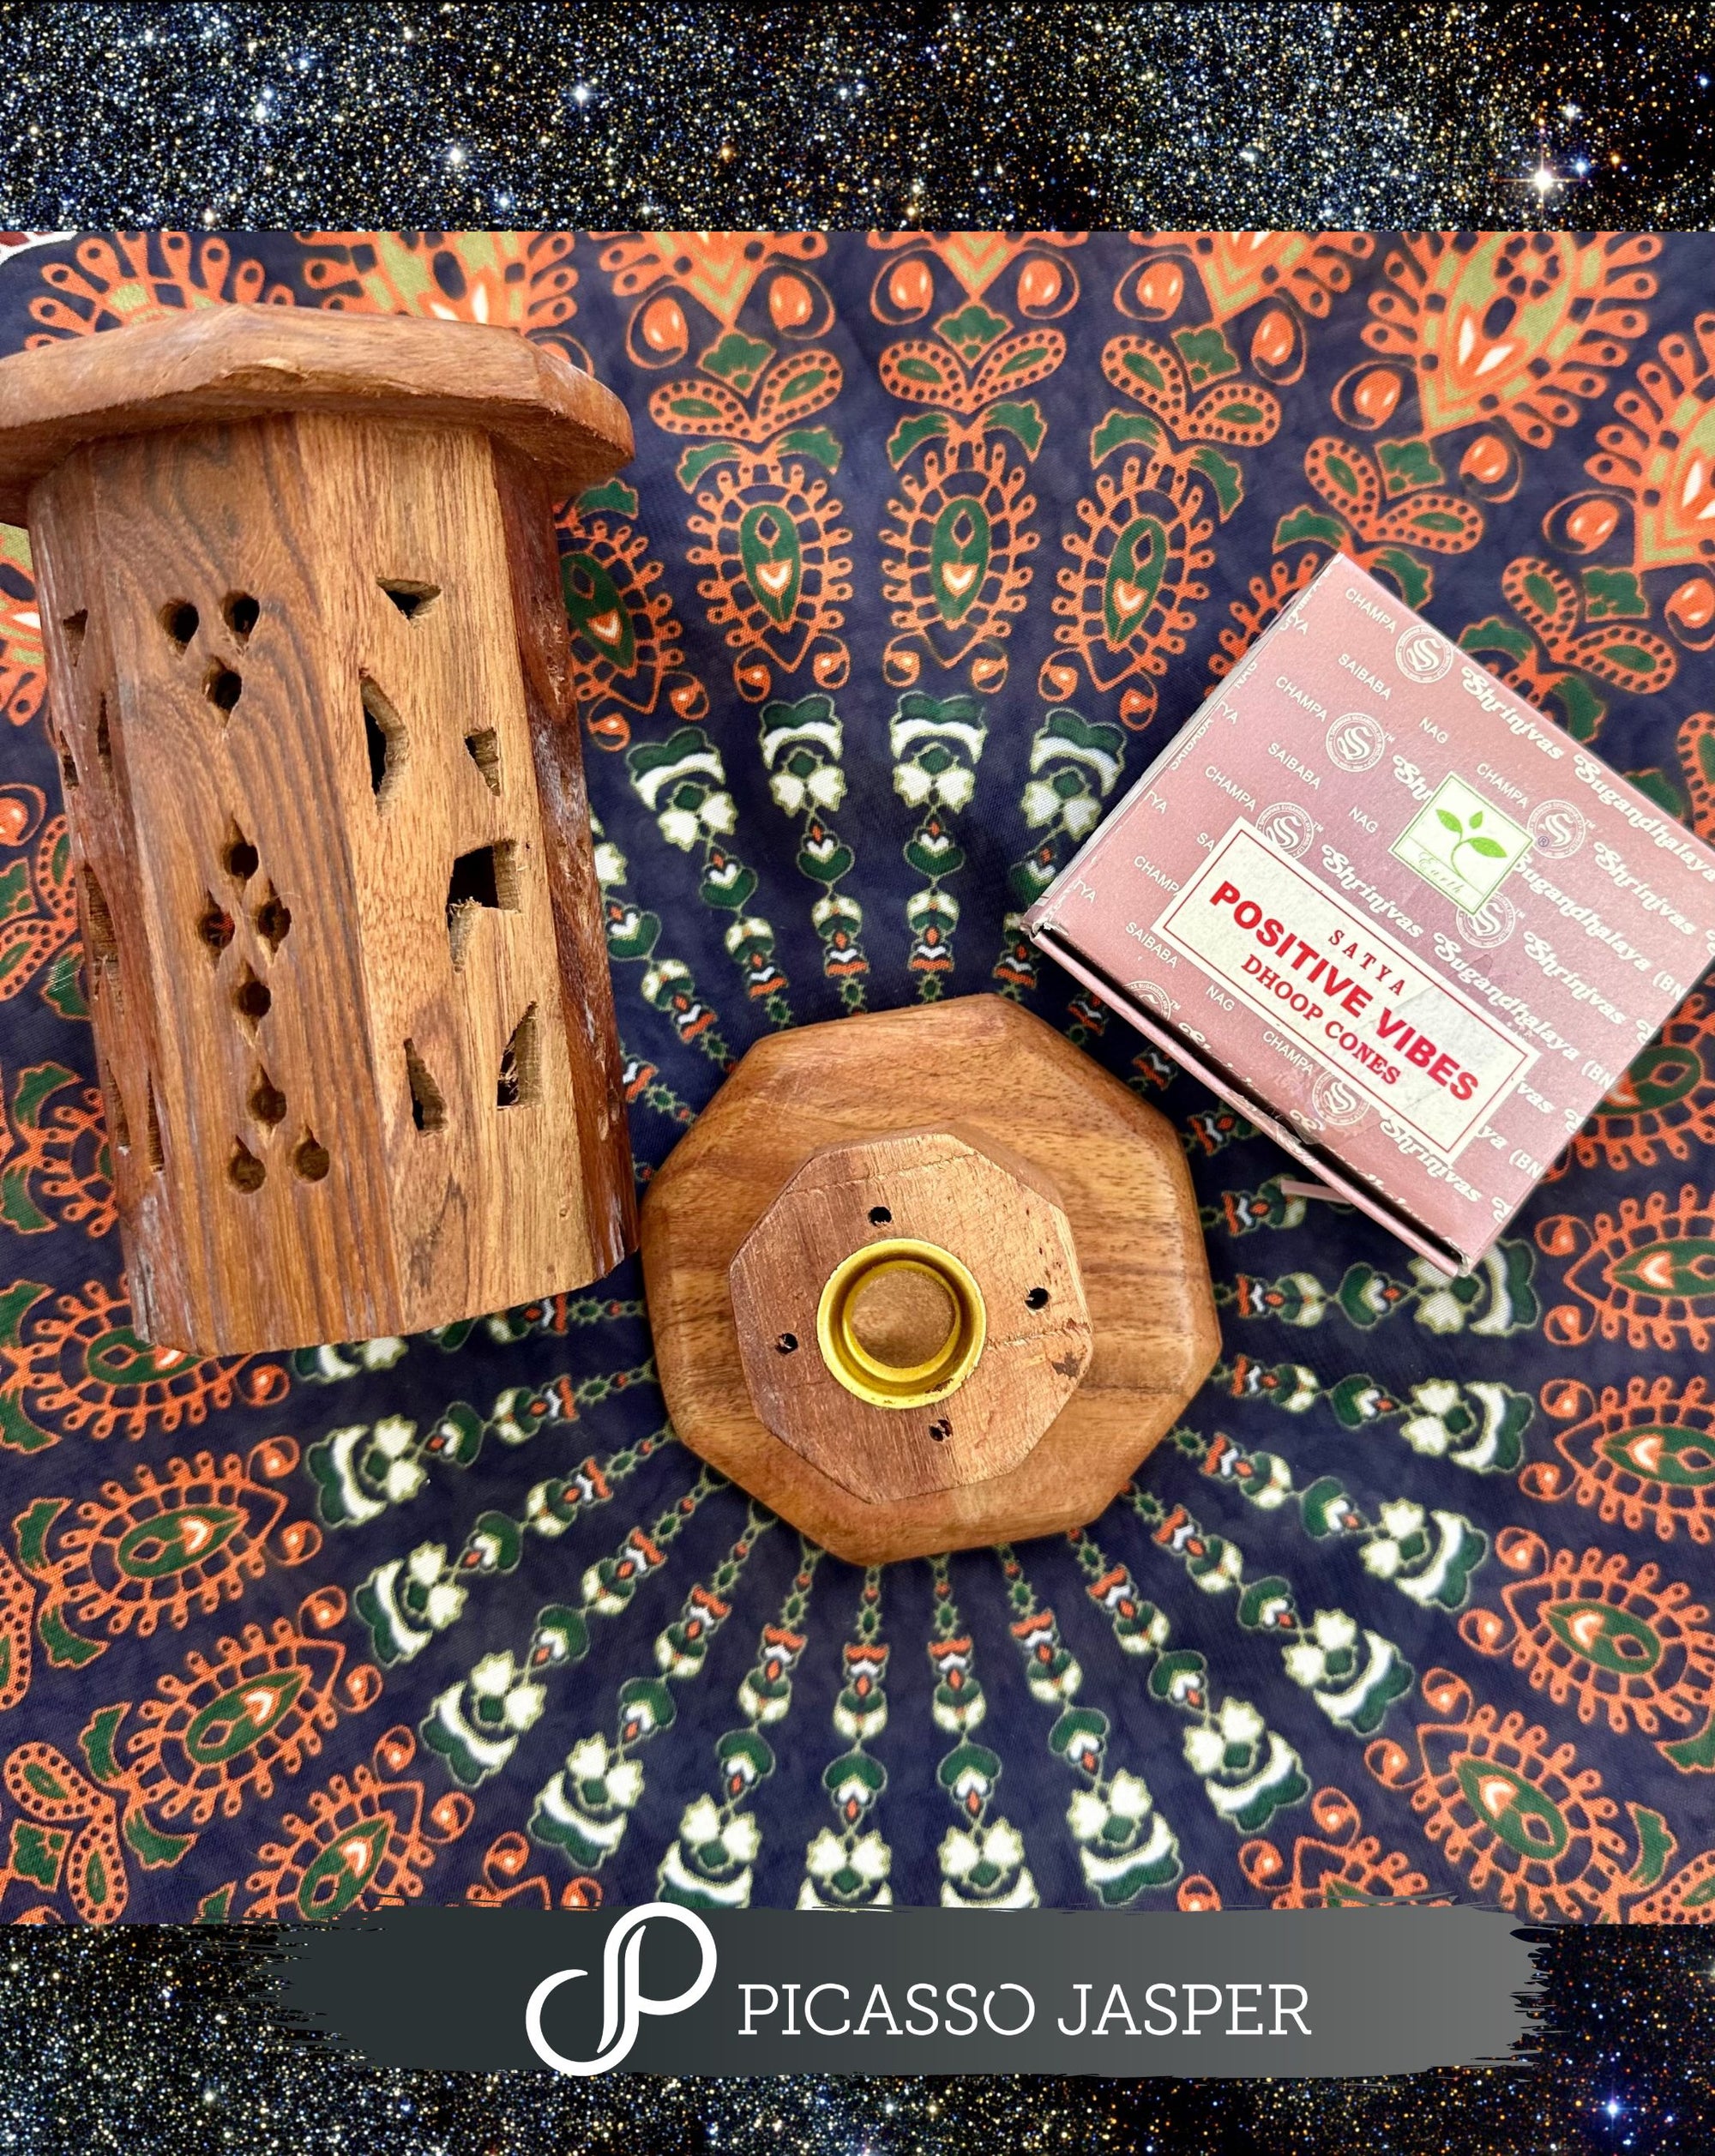 Natural Wood Cone Incense Tower + Positive Vibes Incense Cones